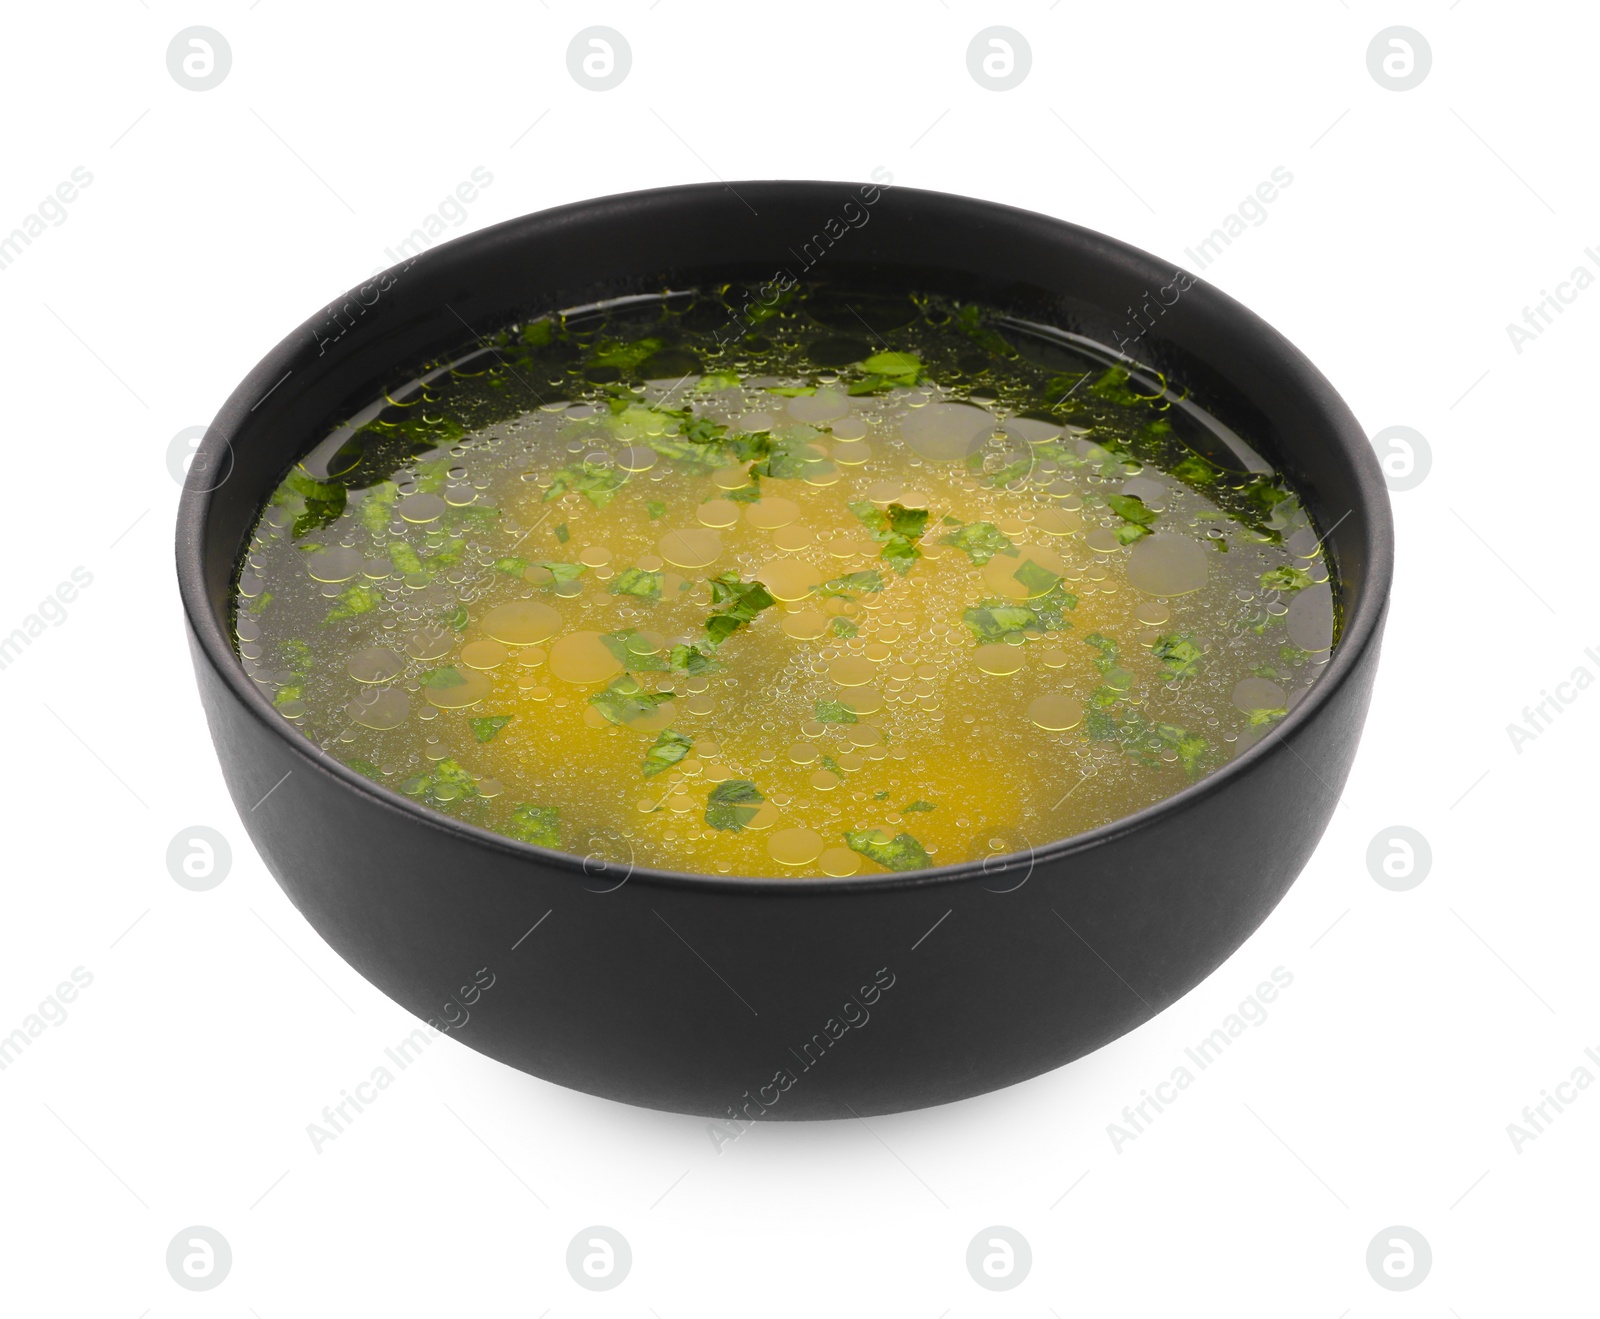 Photo of Delicious chicken soup with parsley isolated on white